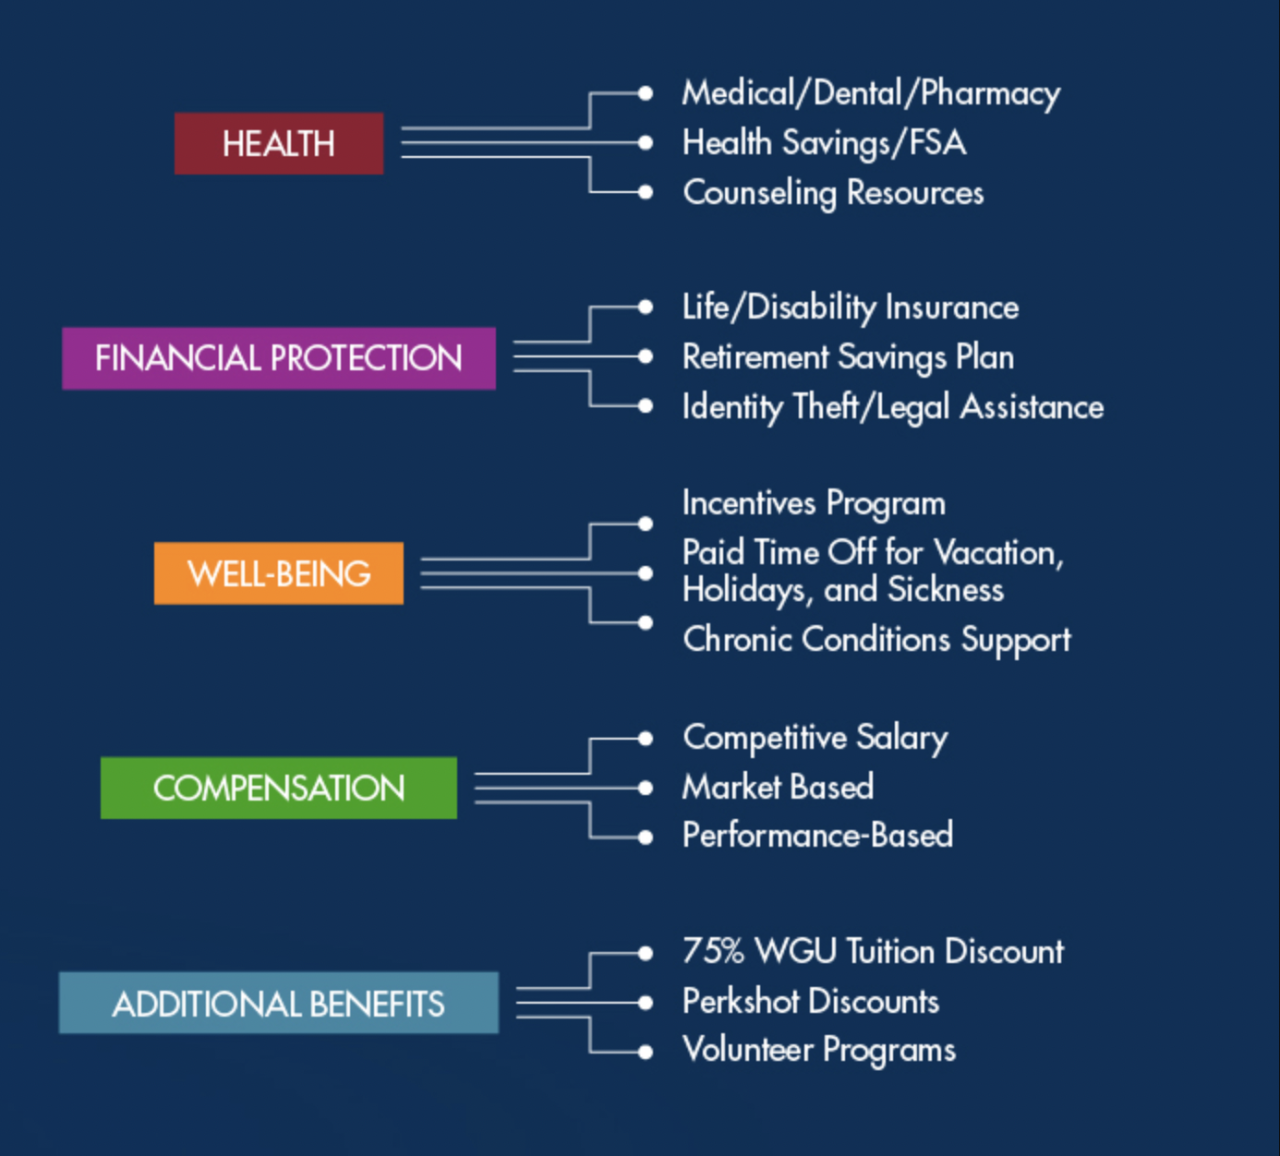 WGU offers employees health benefits, financial protection, well-being benefits, compensation, and additional benefits.